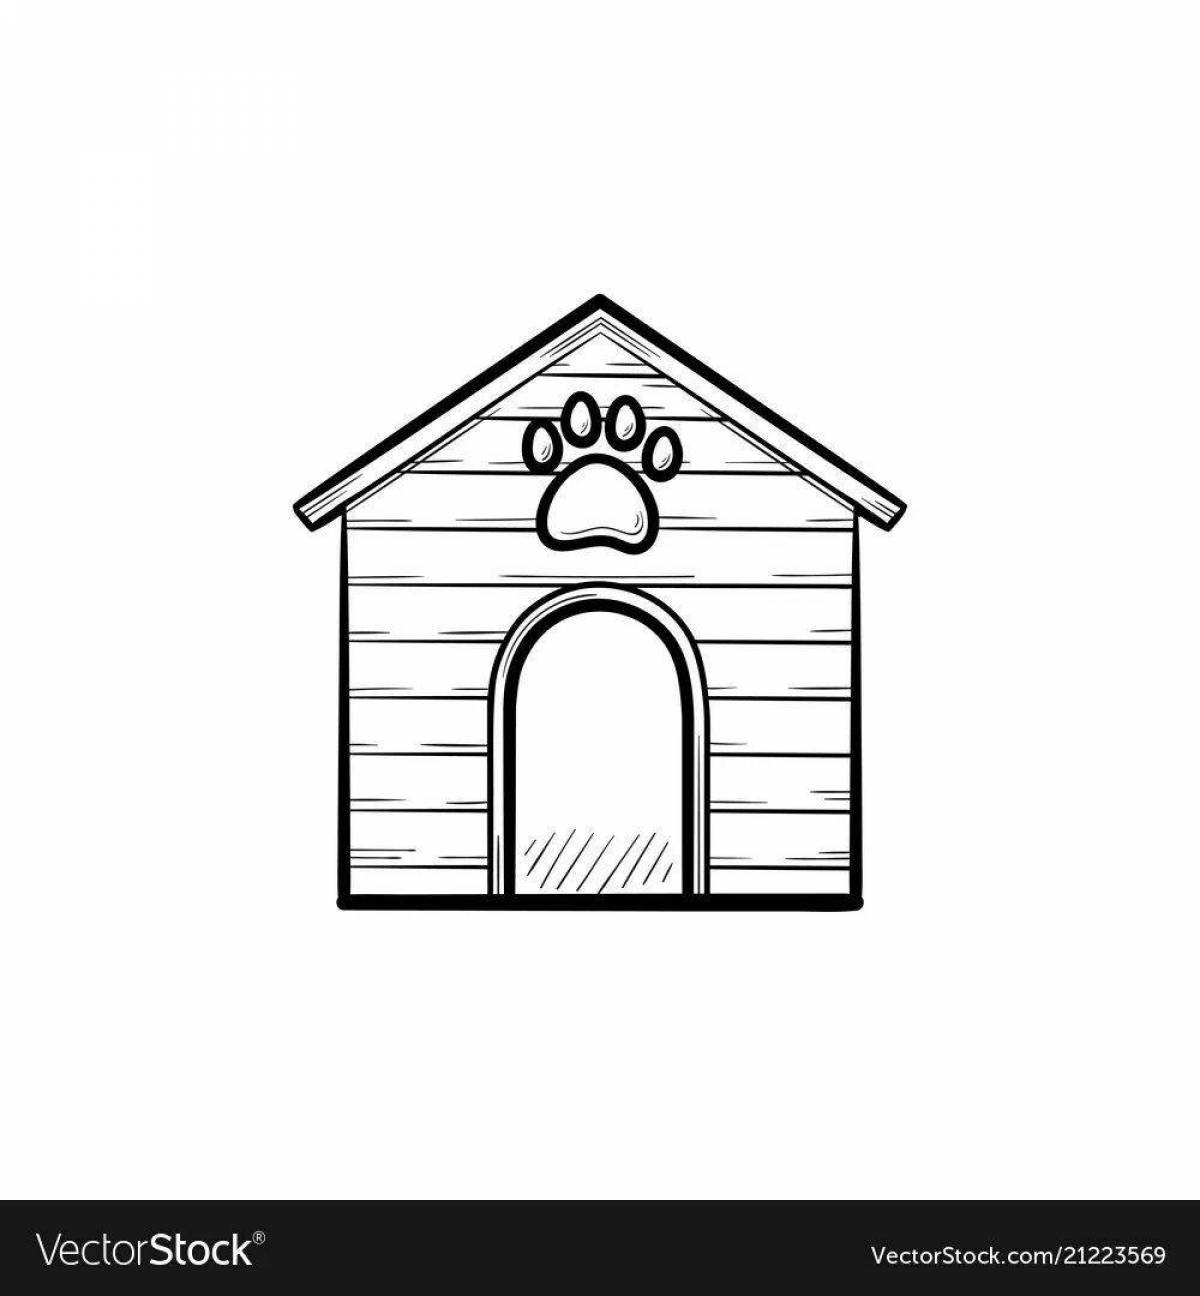 Vibrant dog house coloring page for kids